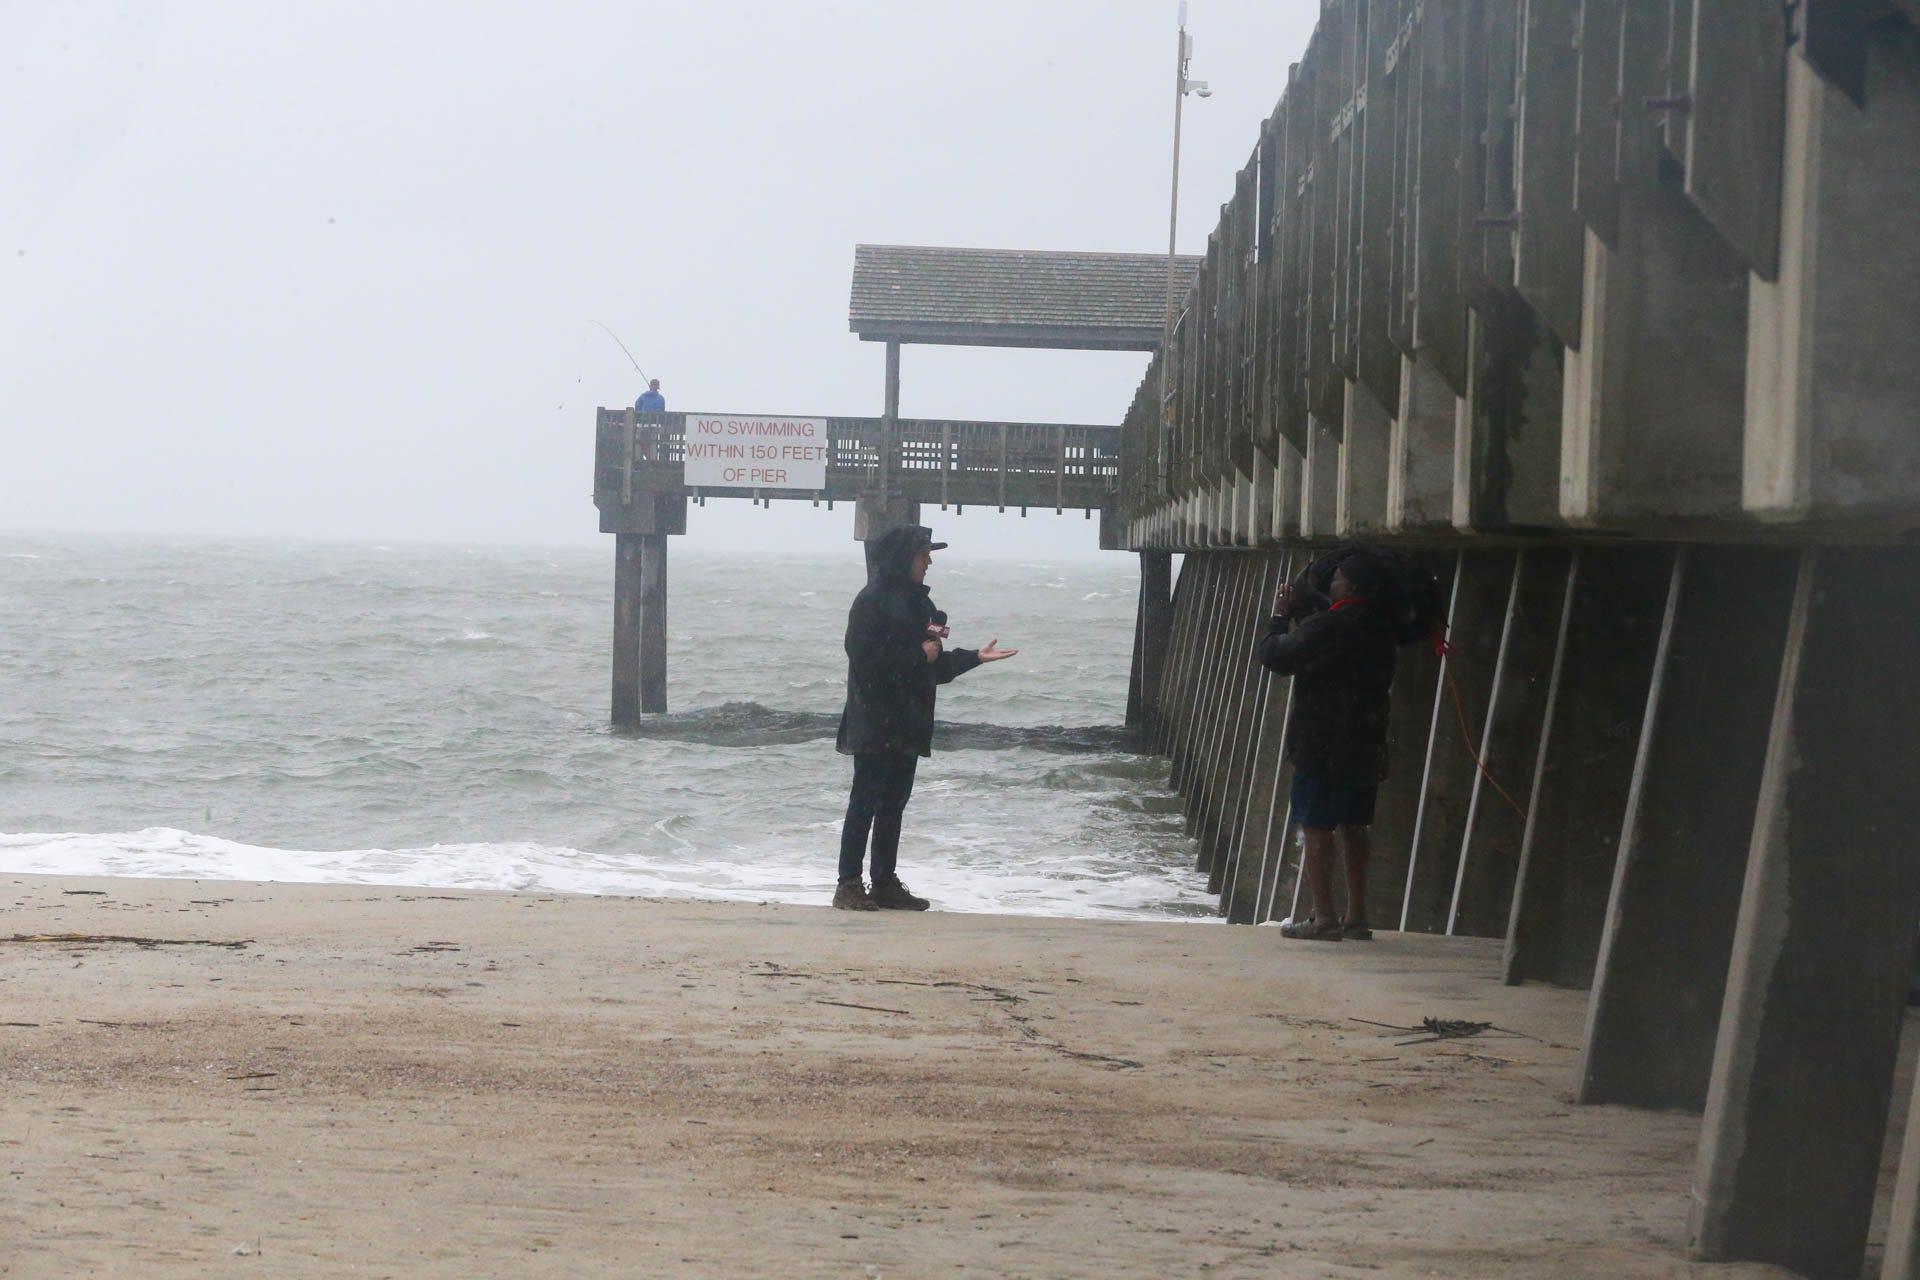 A lone fisherman fishes from the Tybee Island Pier as a news crew reports from Tybee Island, Georgia on Wednesday, August 30, 2023 as Hurricane Idalia made landfall in Florida.